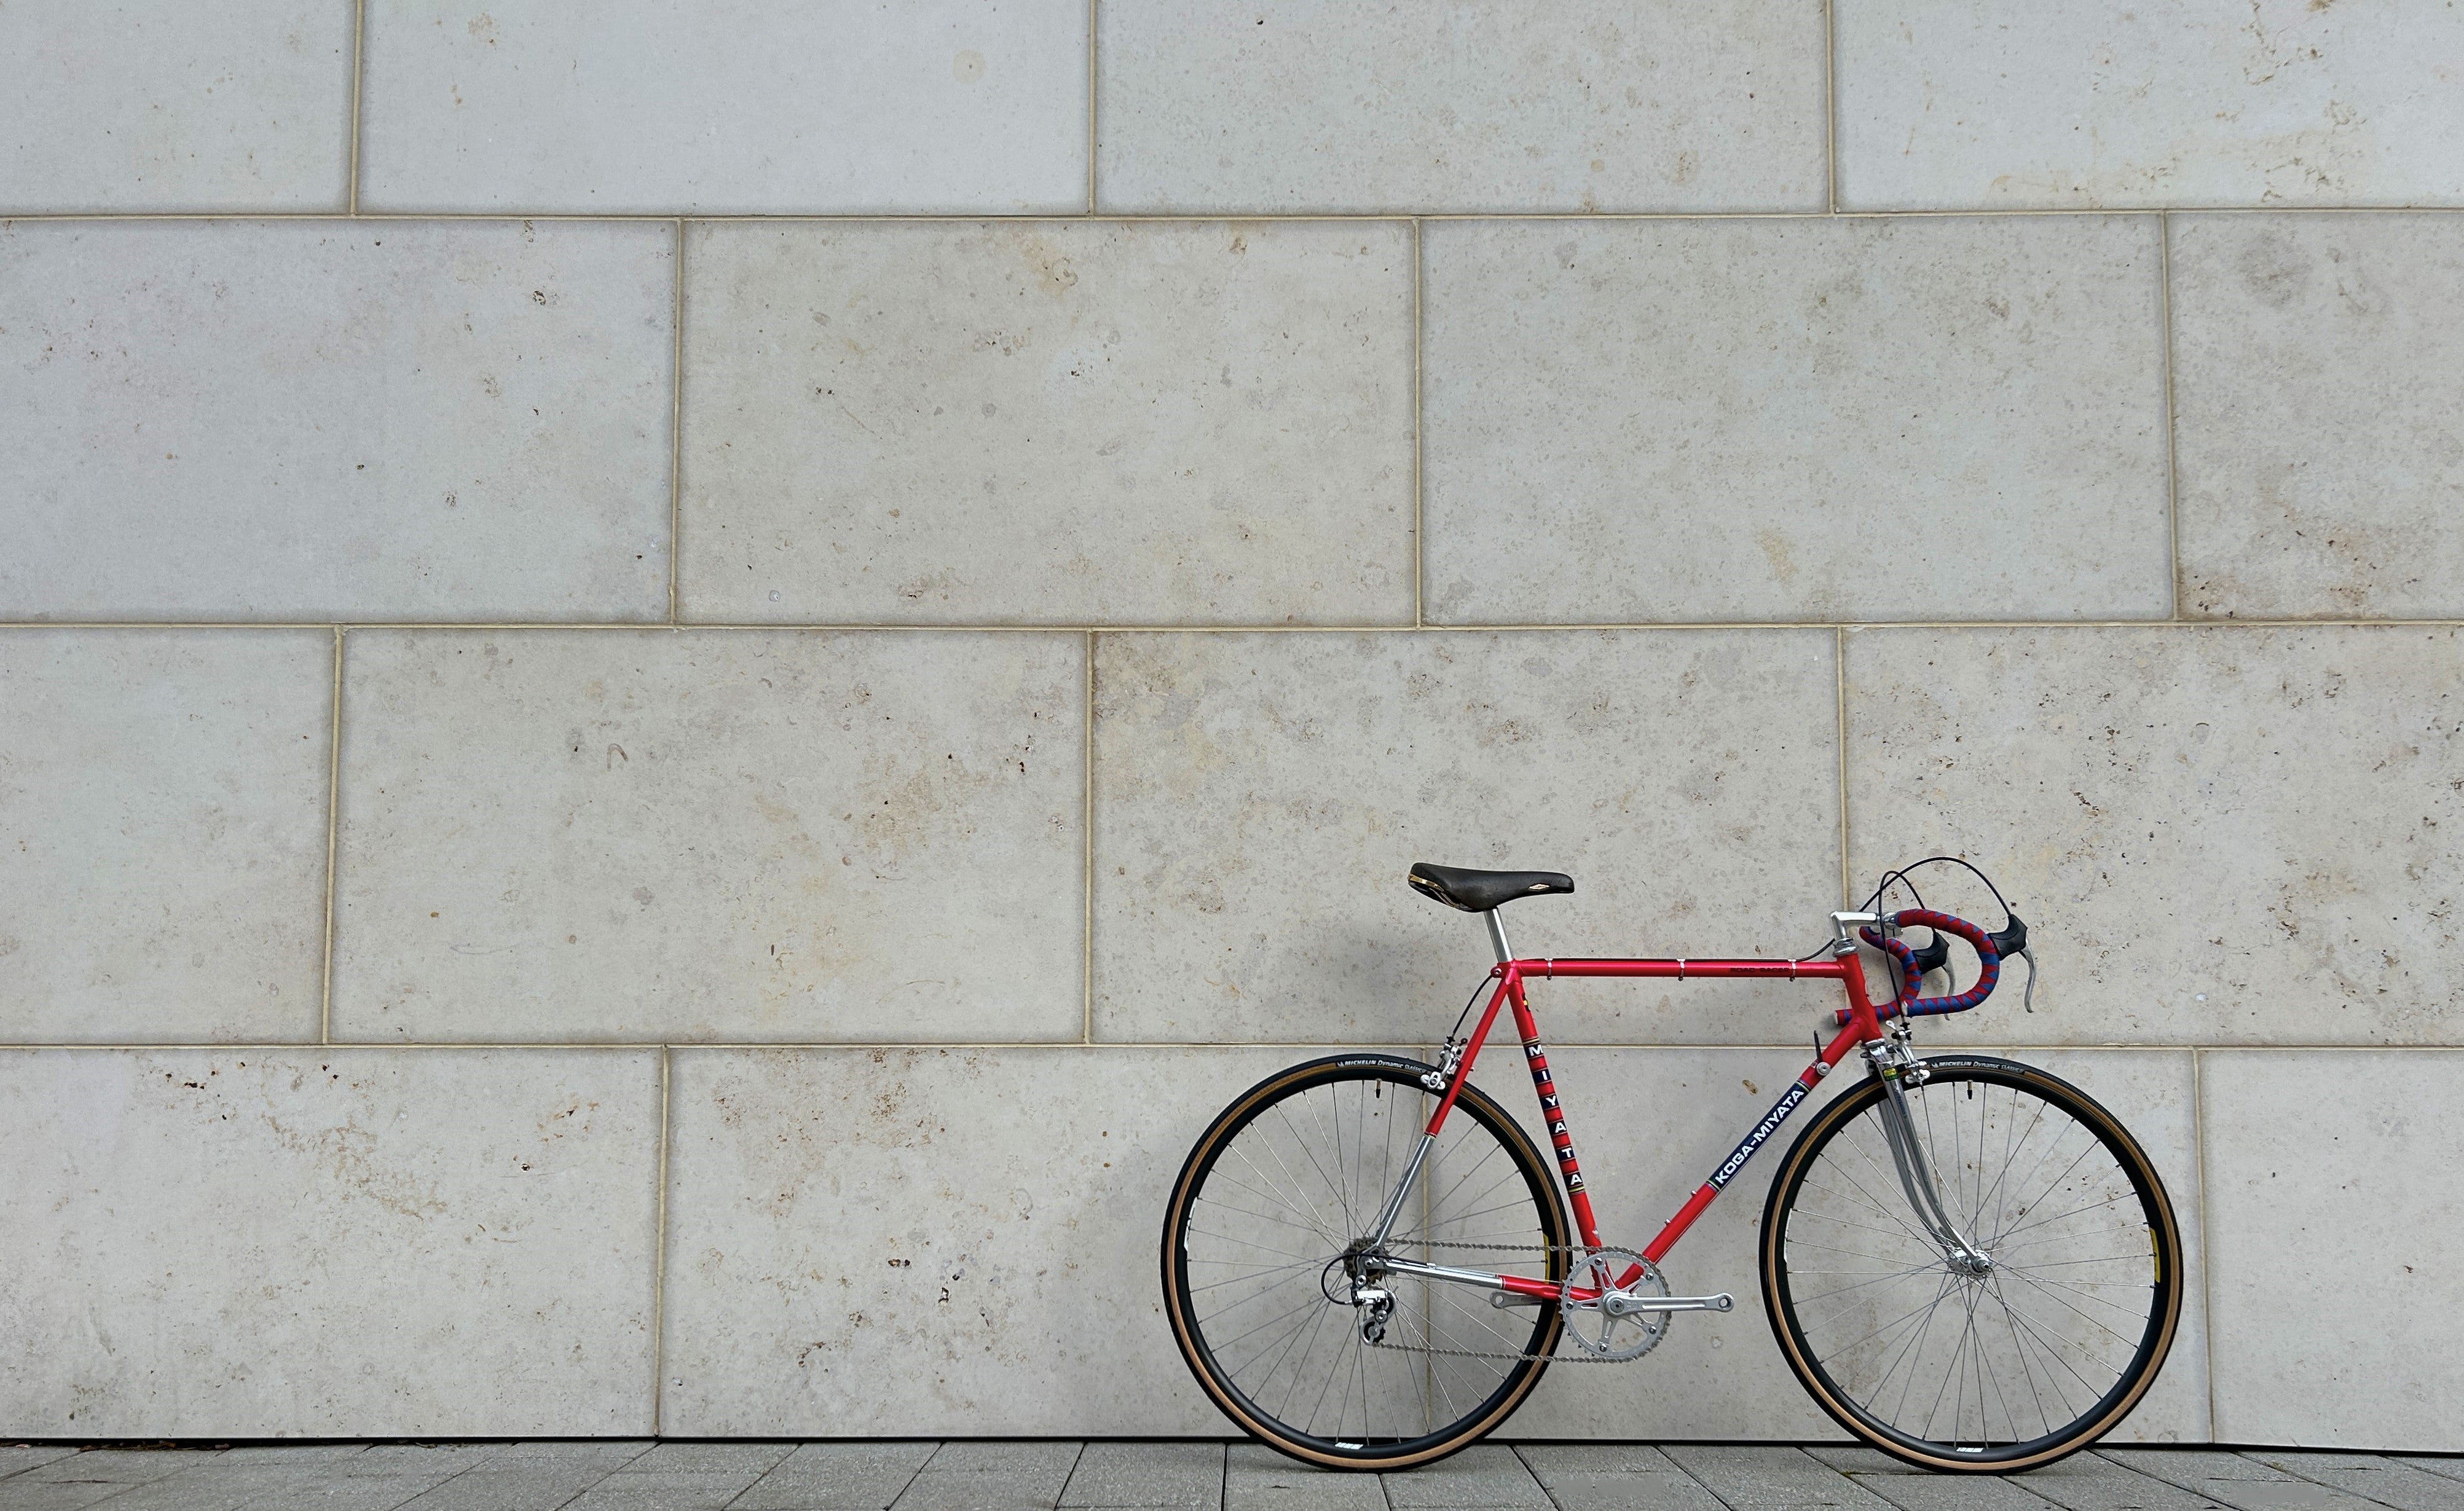 Very Nice red Koga Miyata Vintage Racing Bike from the 1980s leans against a jurassic limestone wall.